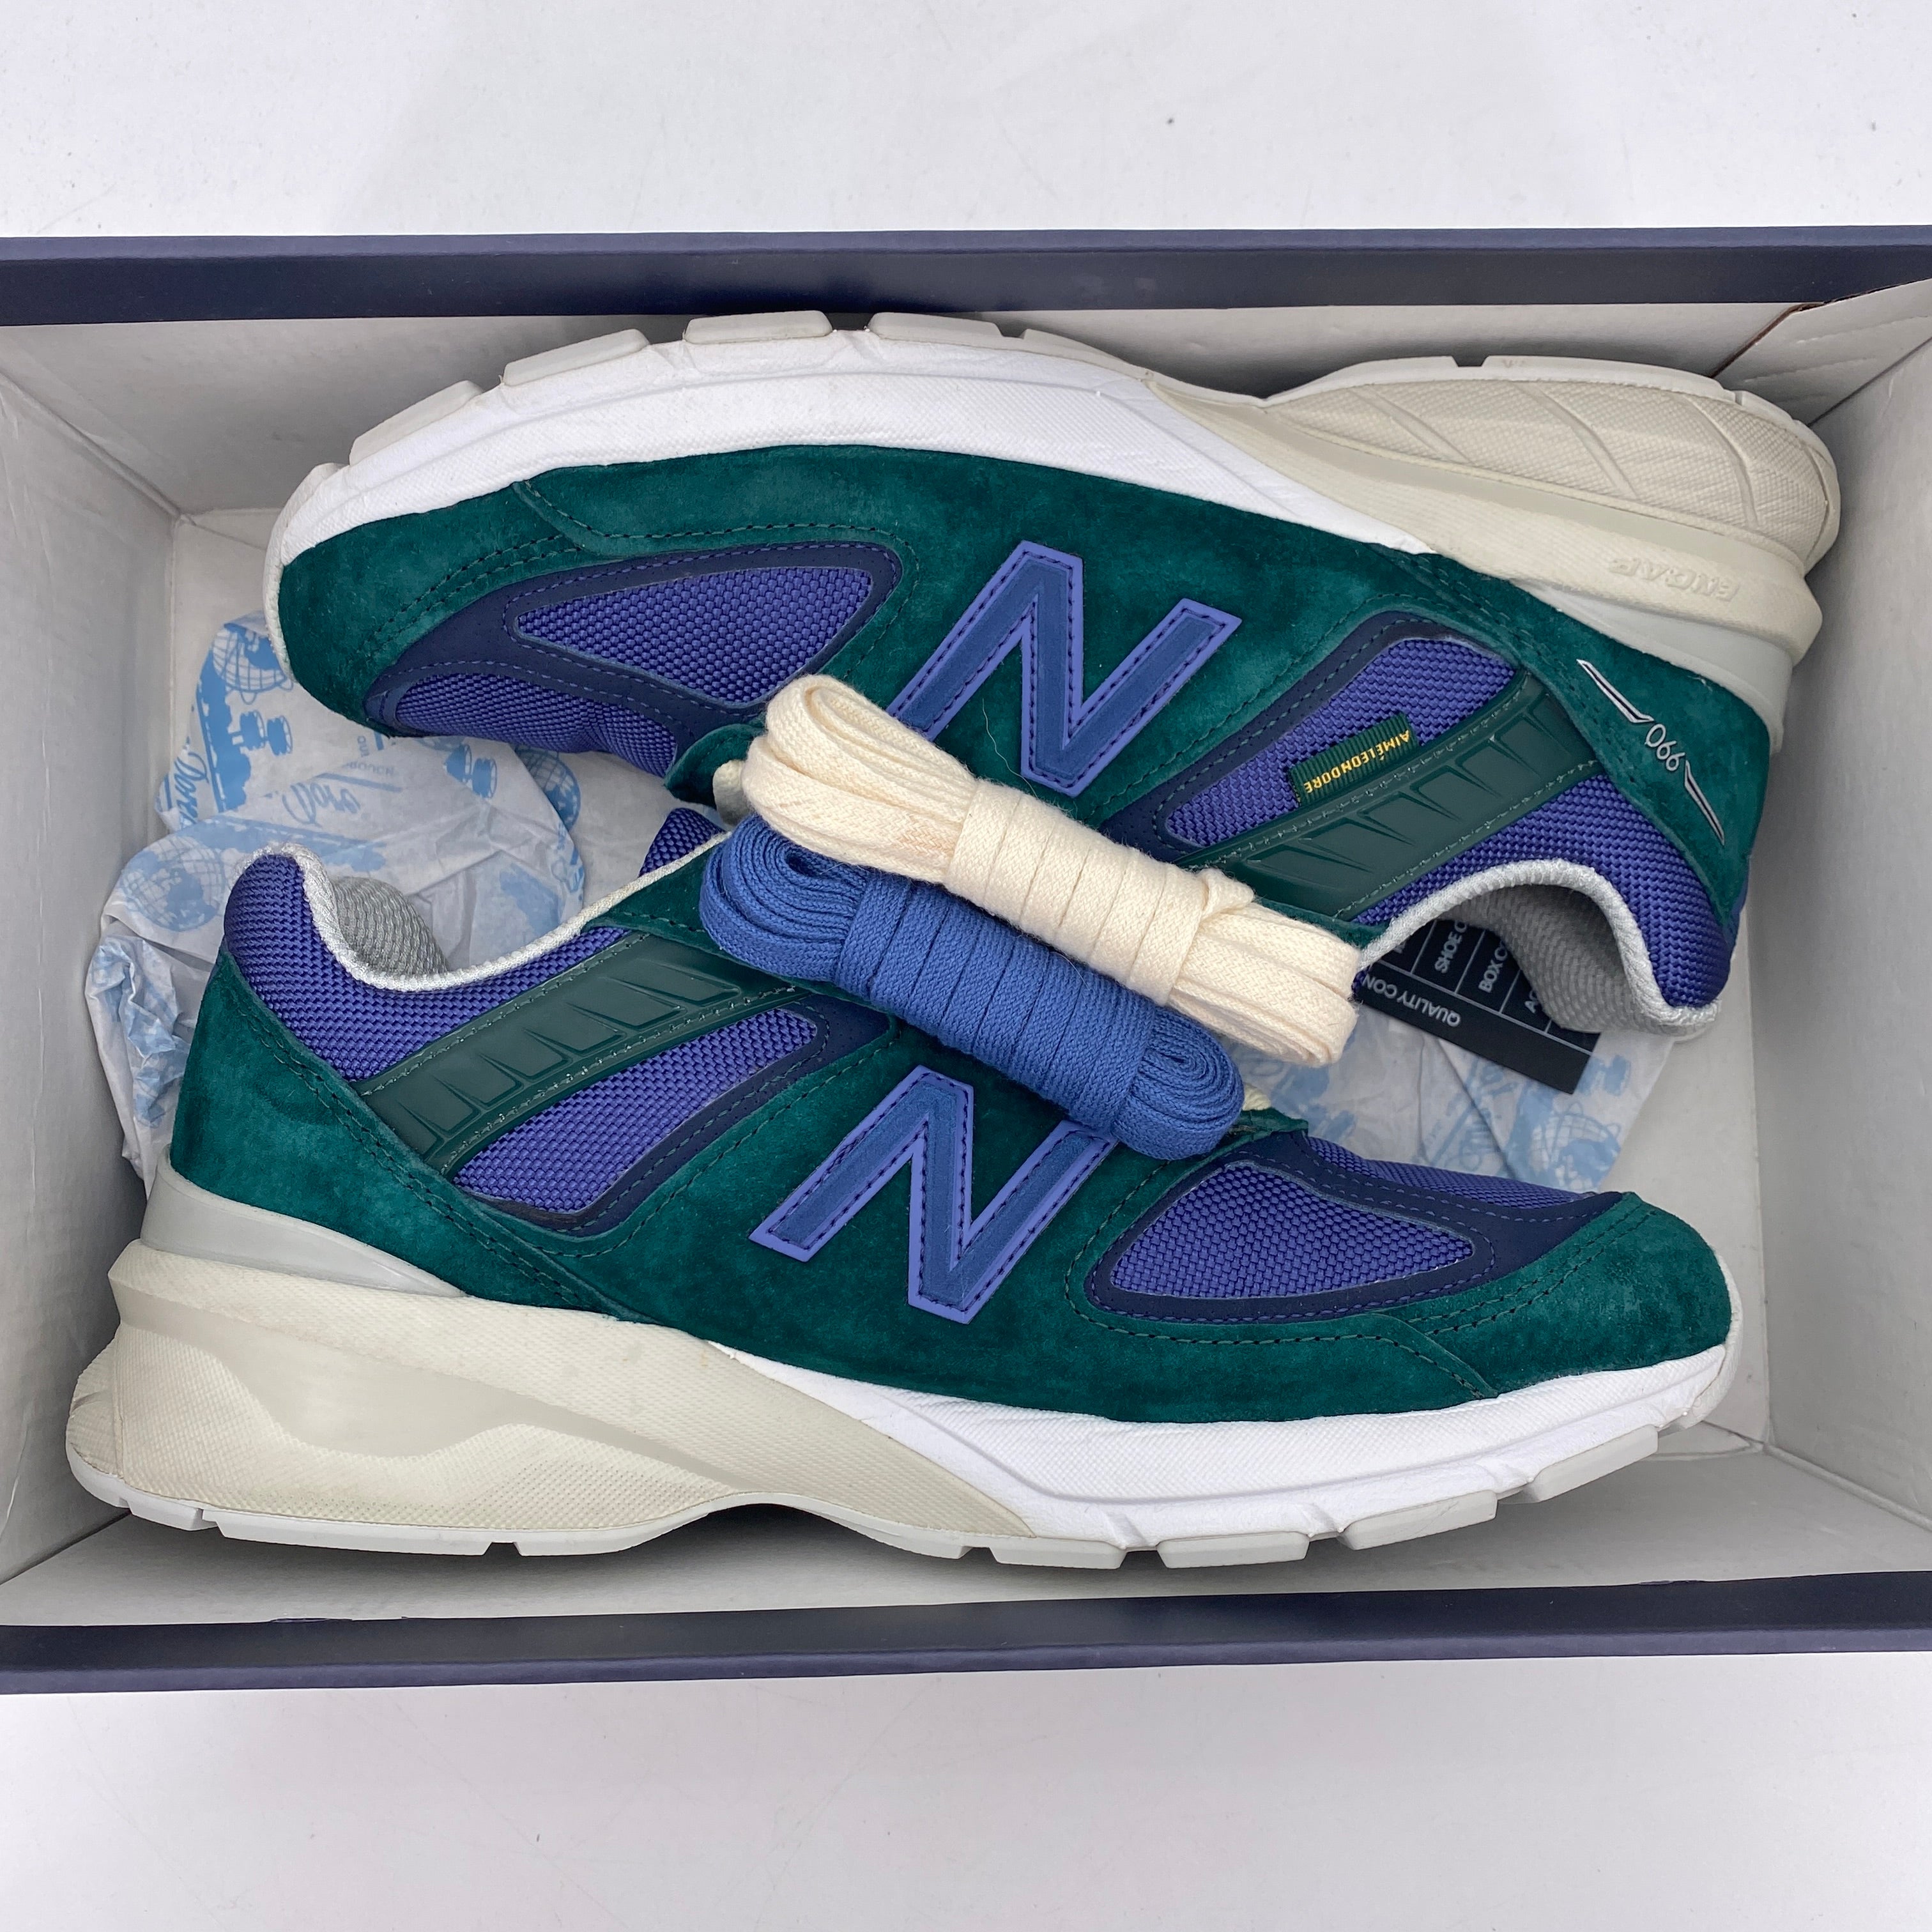 New Balance 990v5 &quot;Life In The Balance&quot; 2019 Used Size 7.5